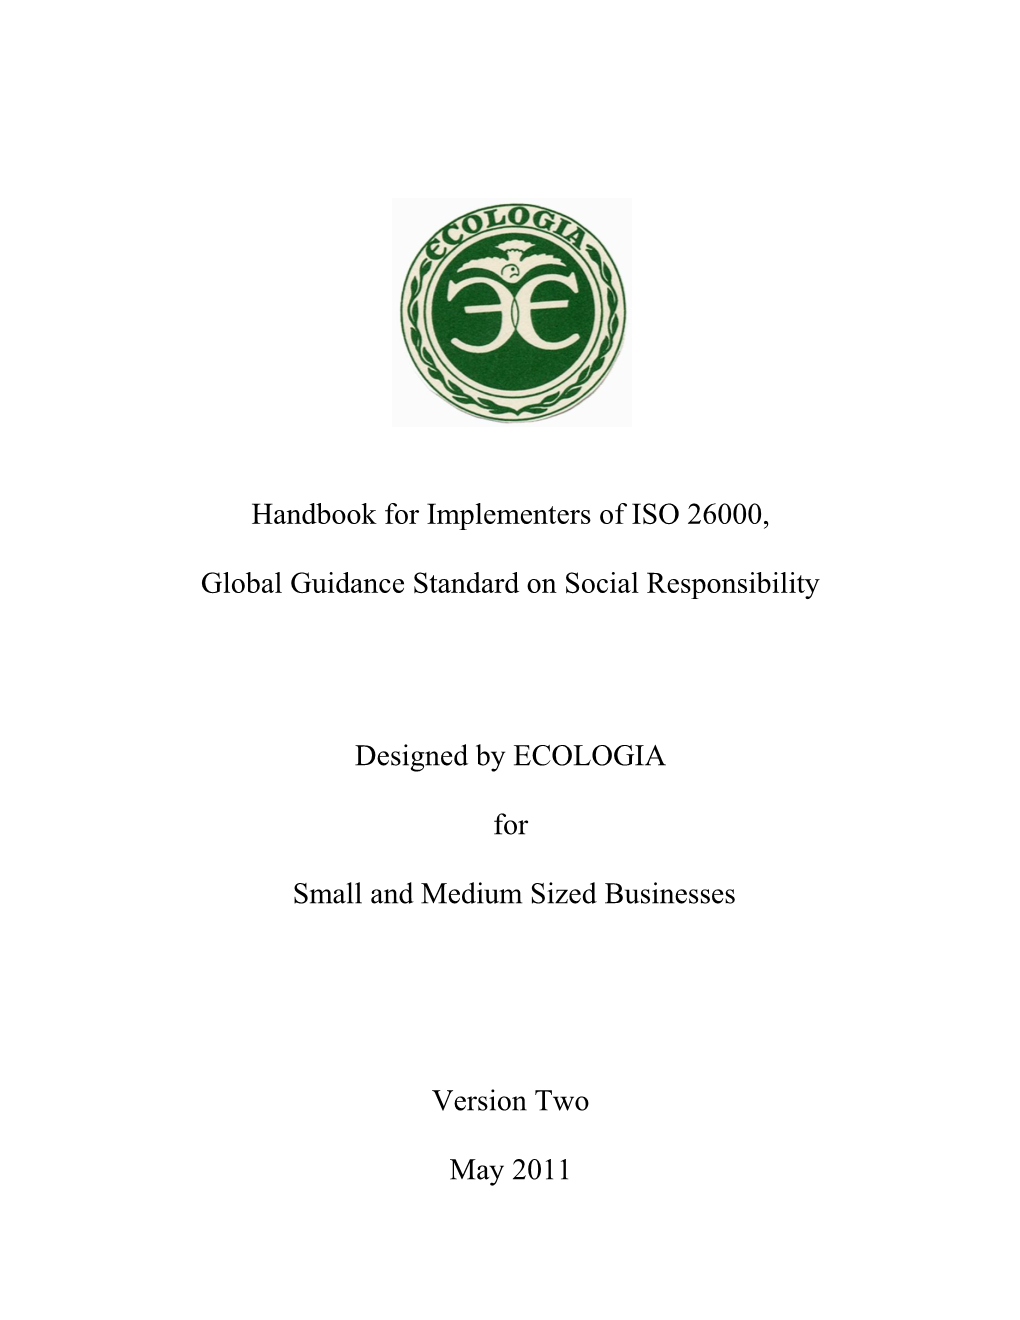 ECOLOGIA's Handbook for Implementers of ISO 26000